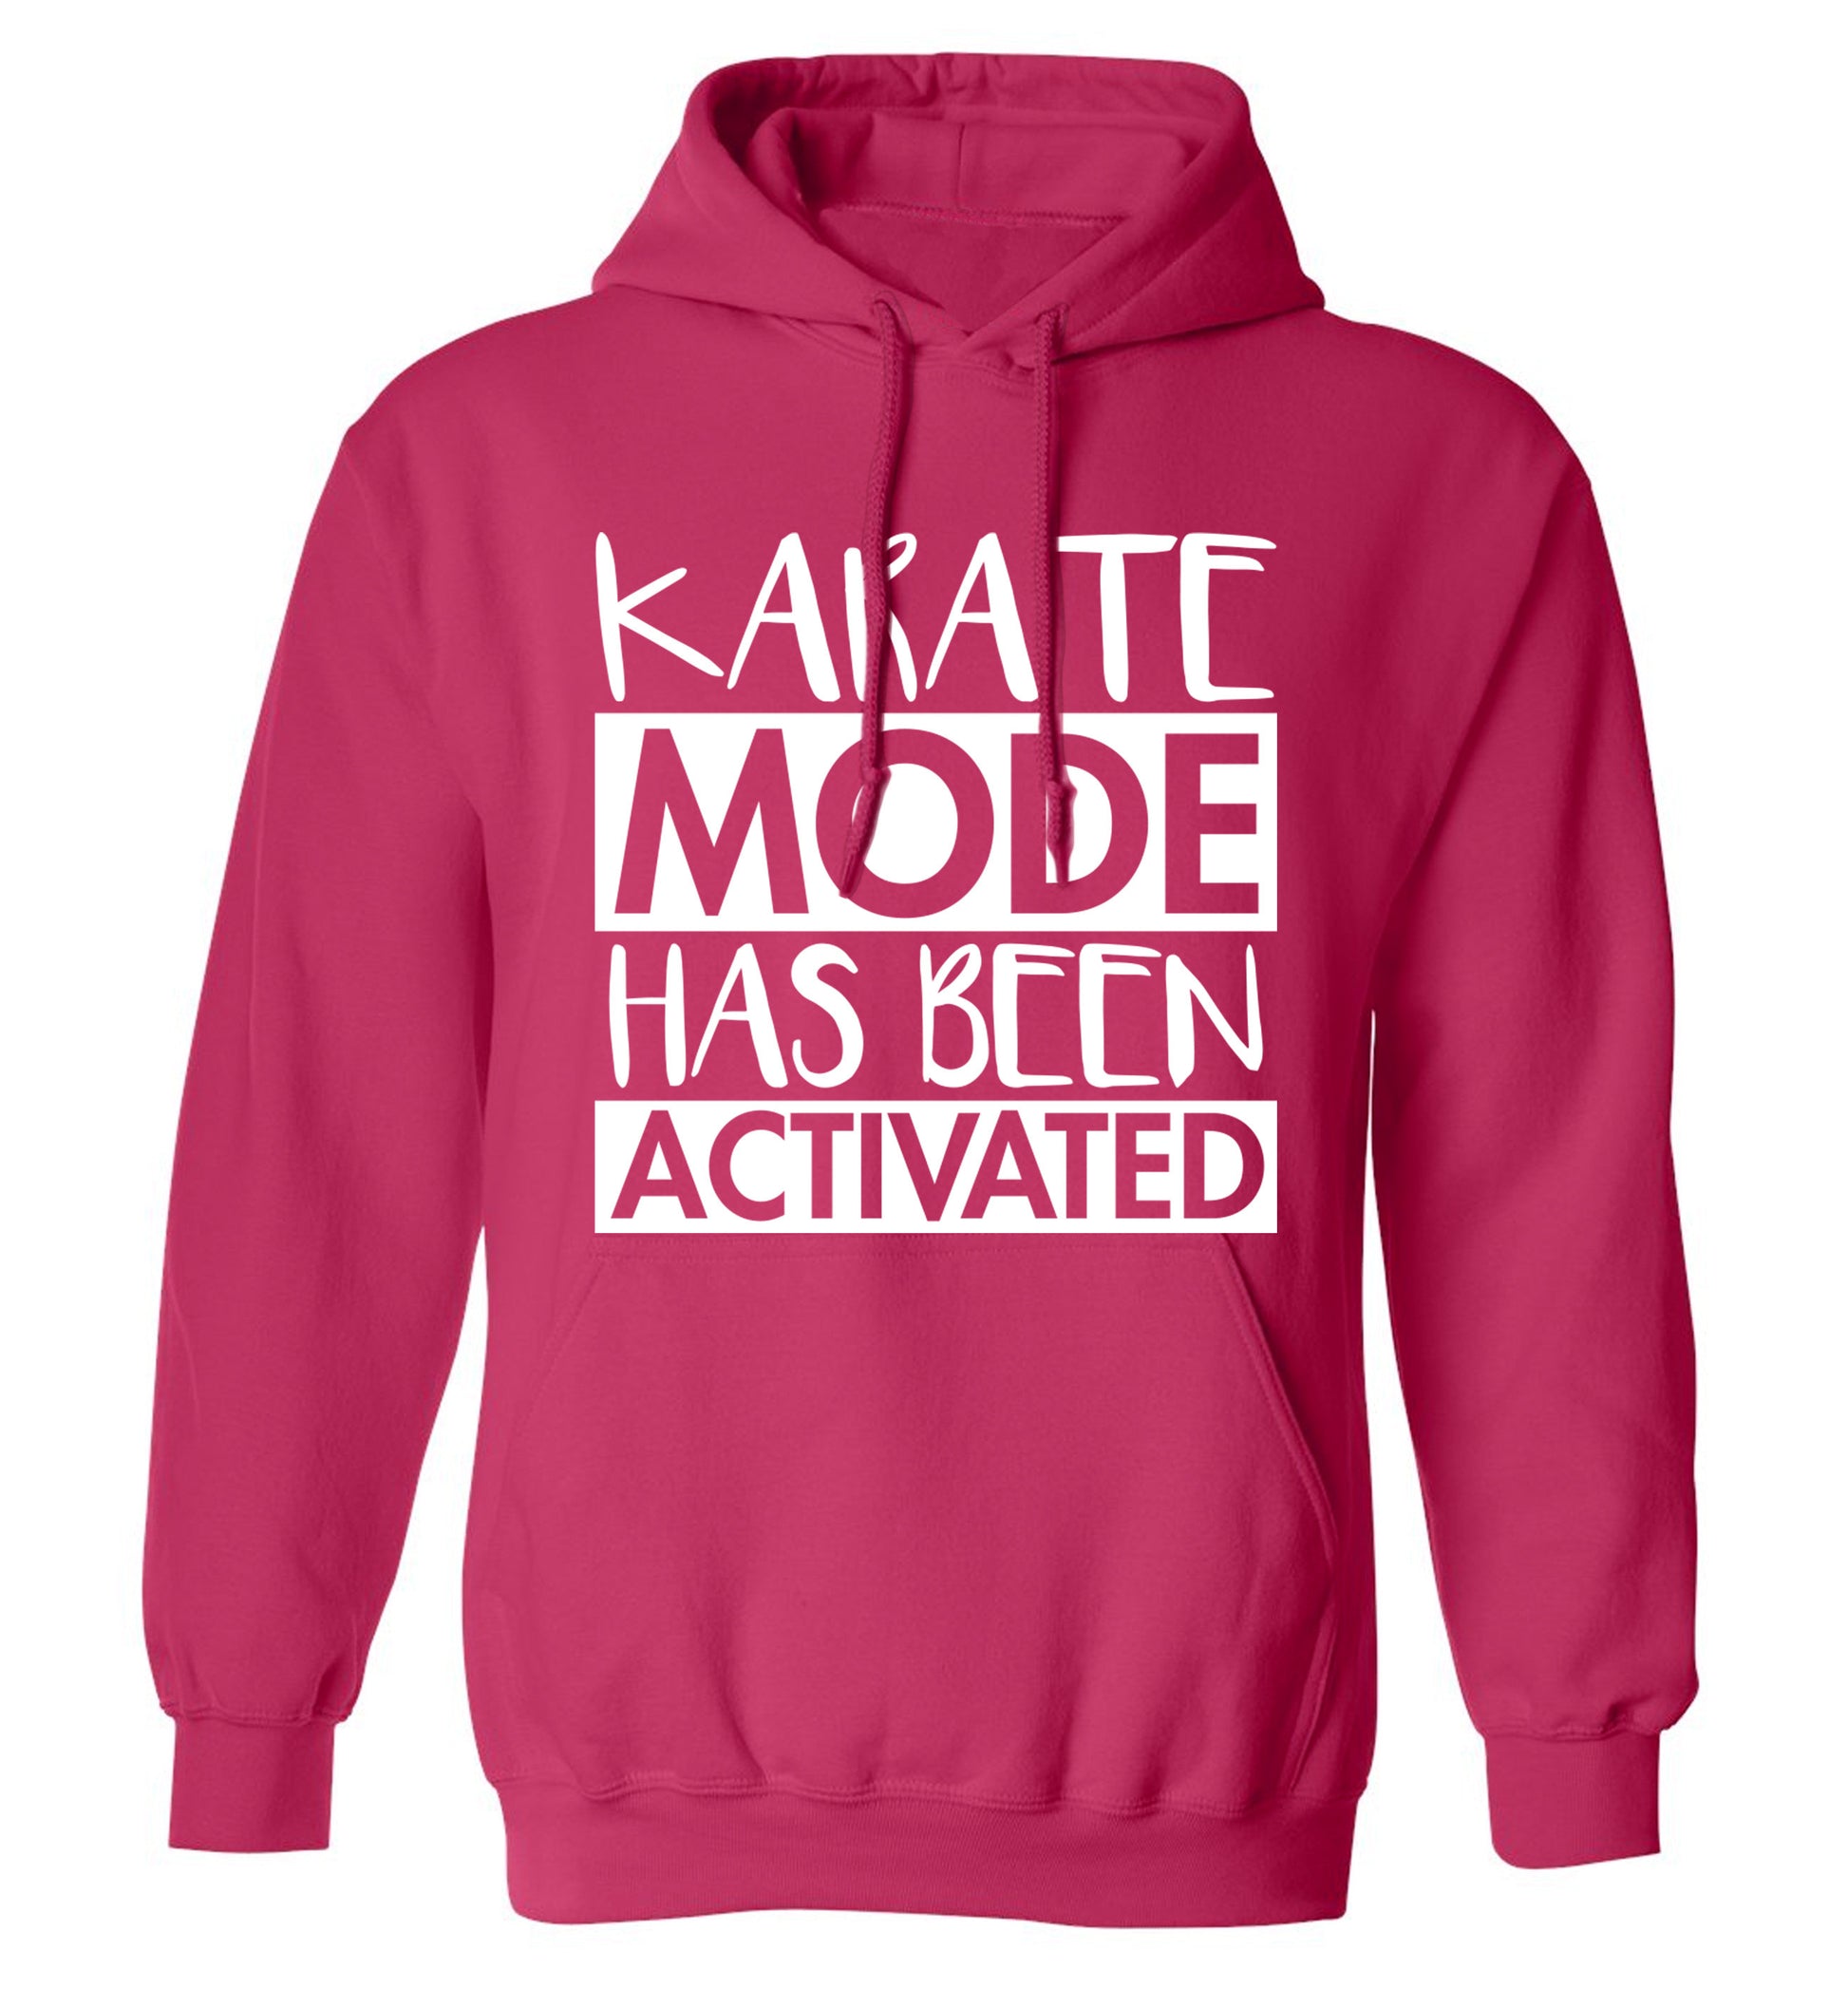 Karate mode activated adults unisex pink hoodie 2XL